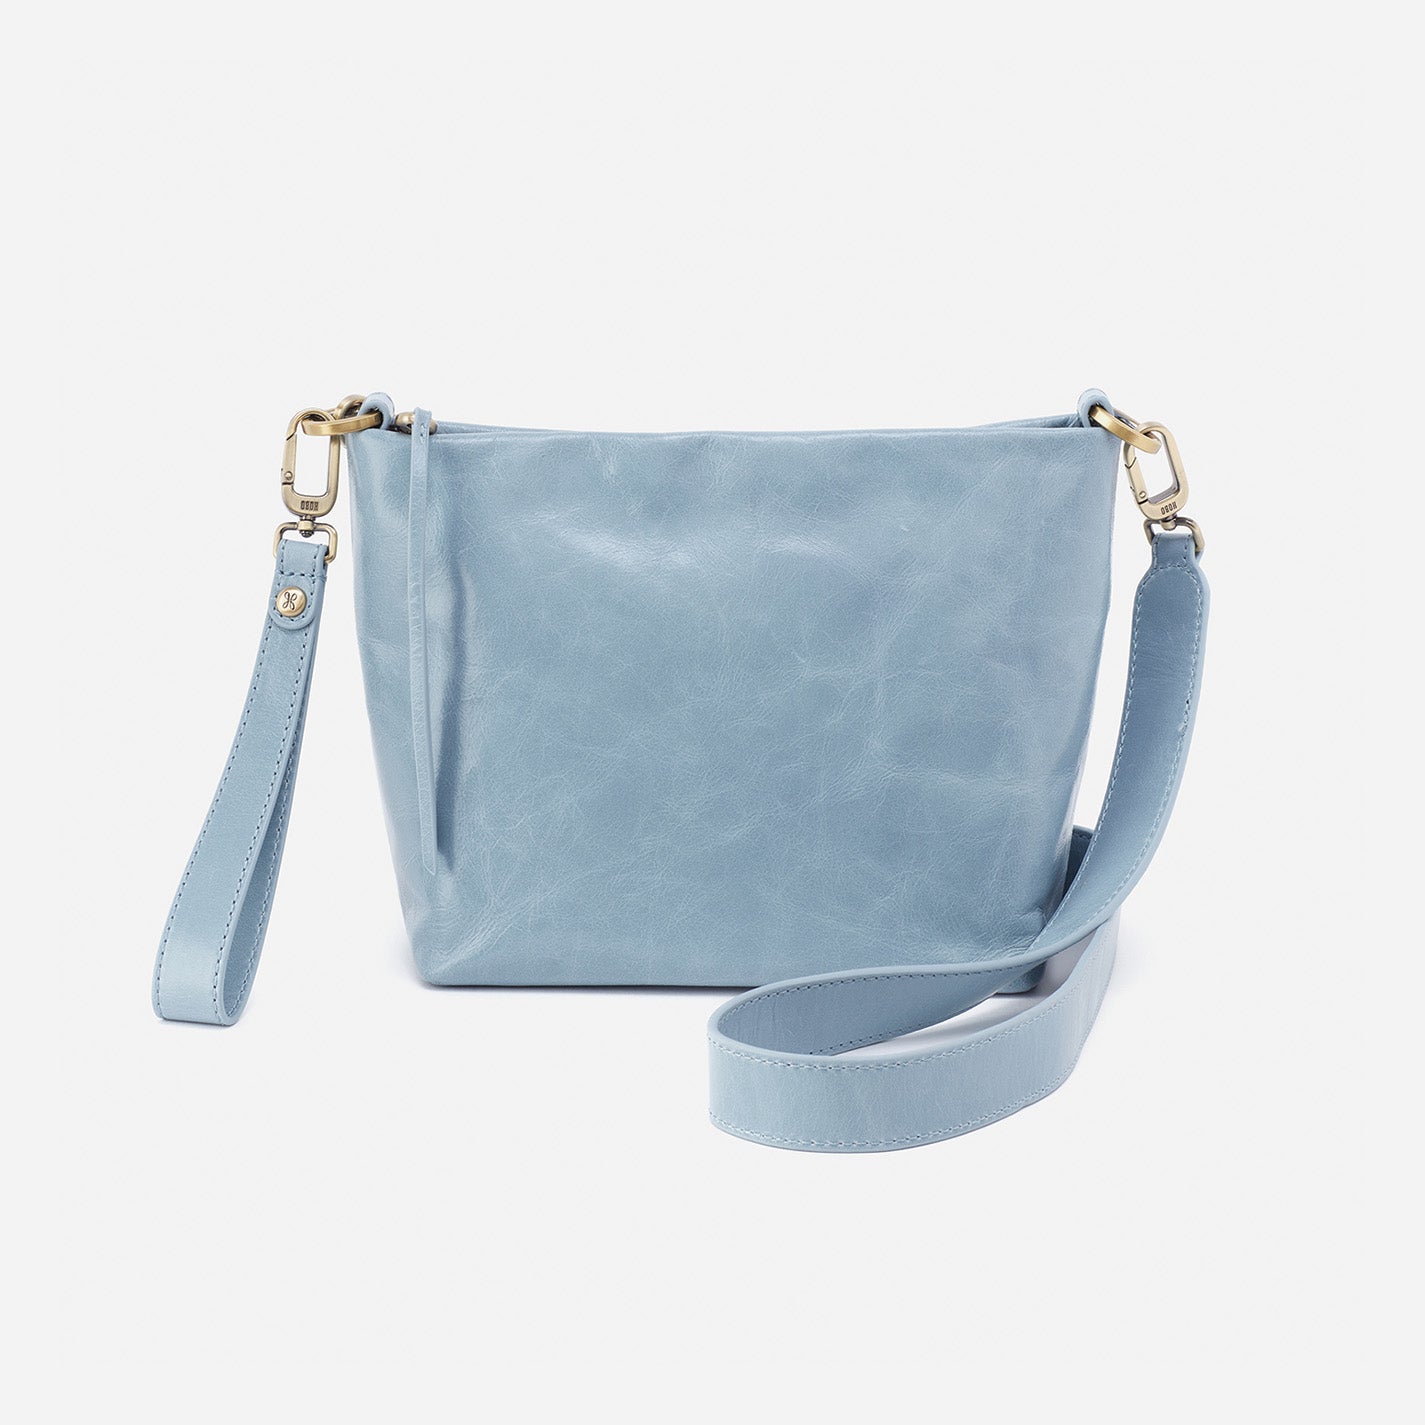 cornflower Ashe Crossbody with strap and wristlet draped around it on a white background.